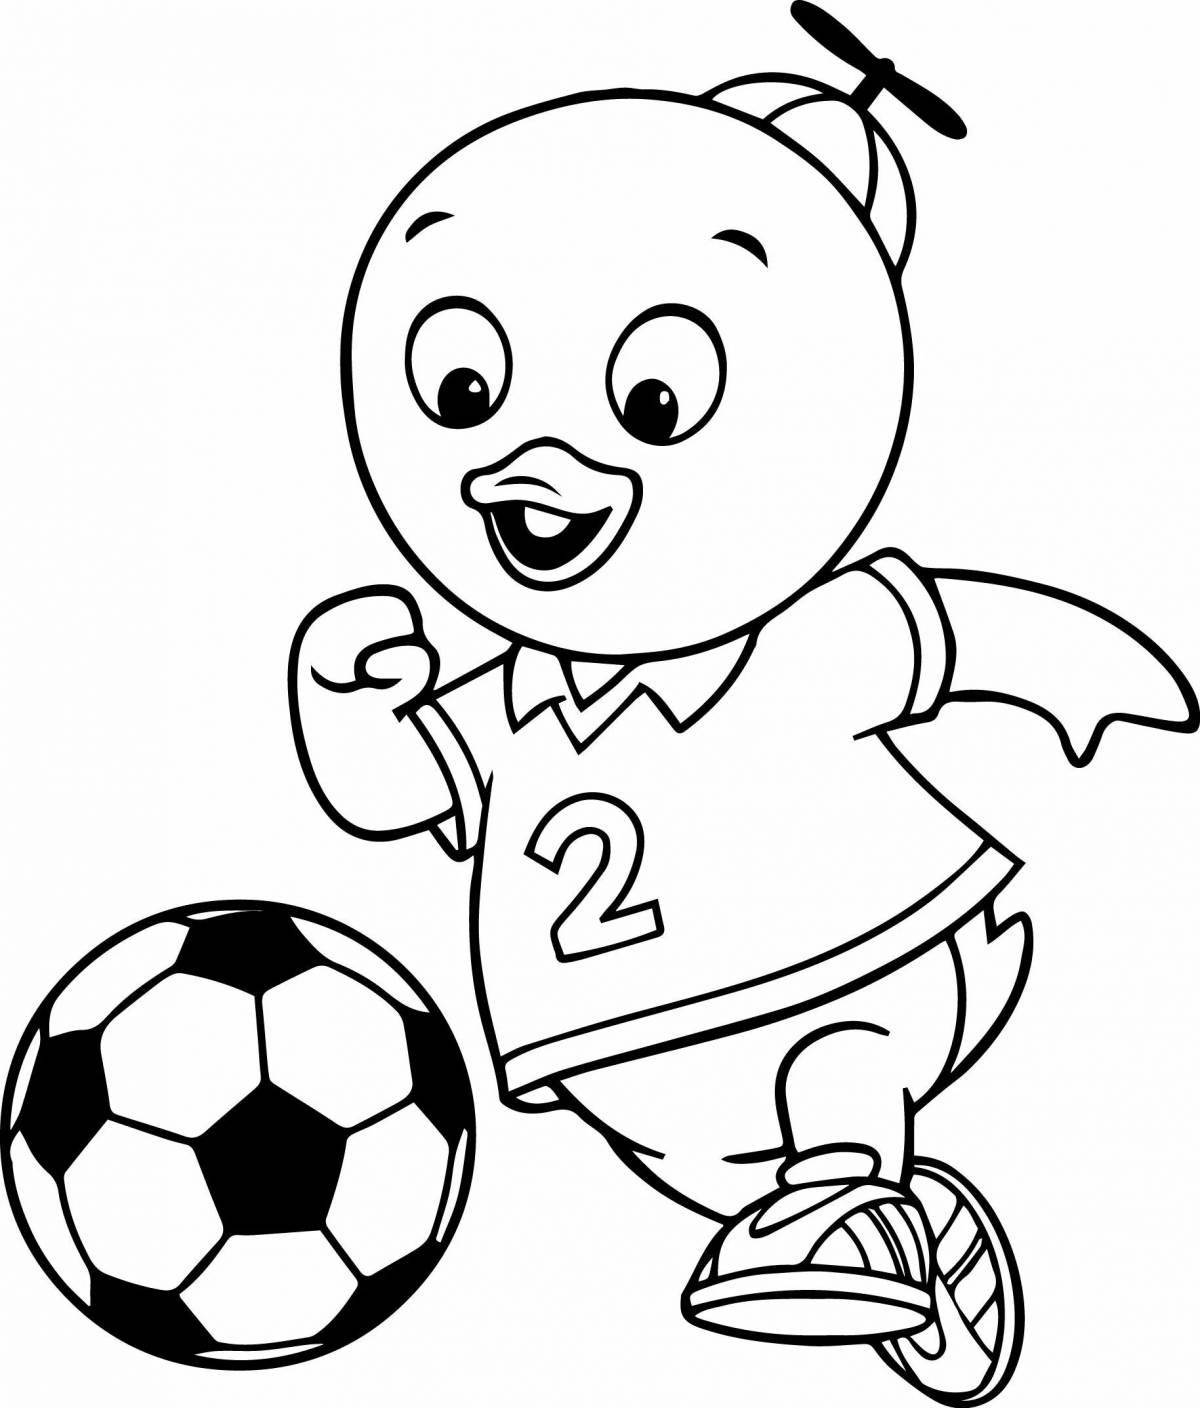 Pablo's playful coloring page